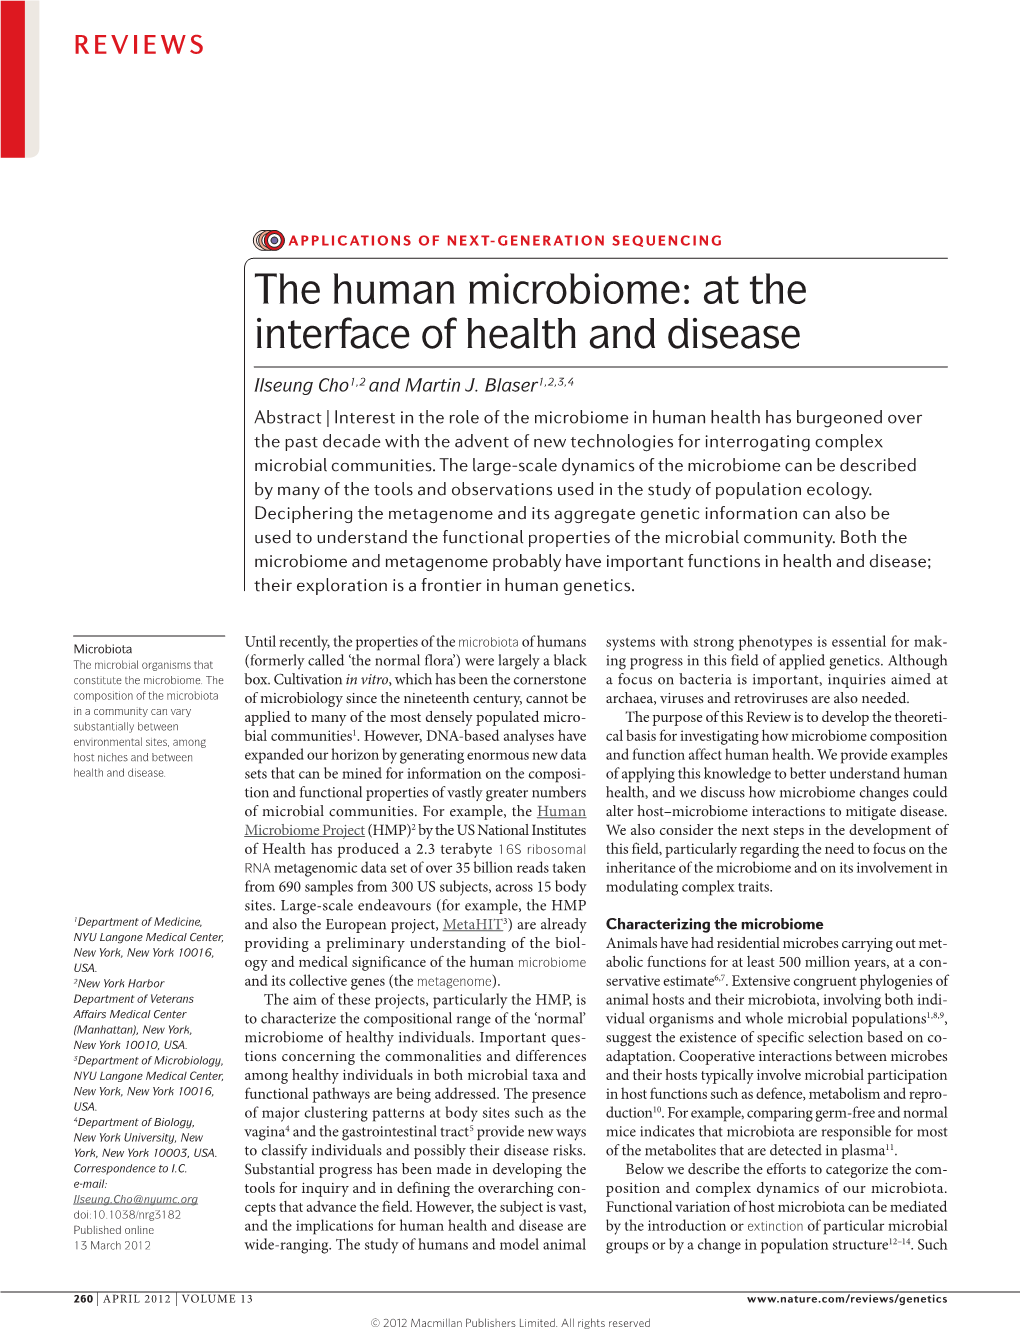 The Human Microbiome: at the Interface of Health and Disease